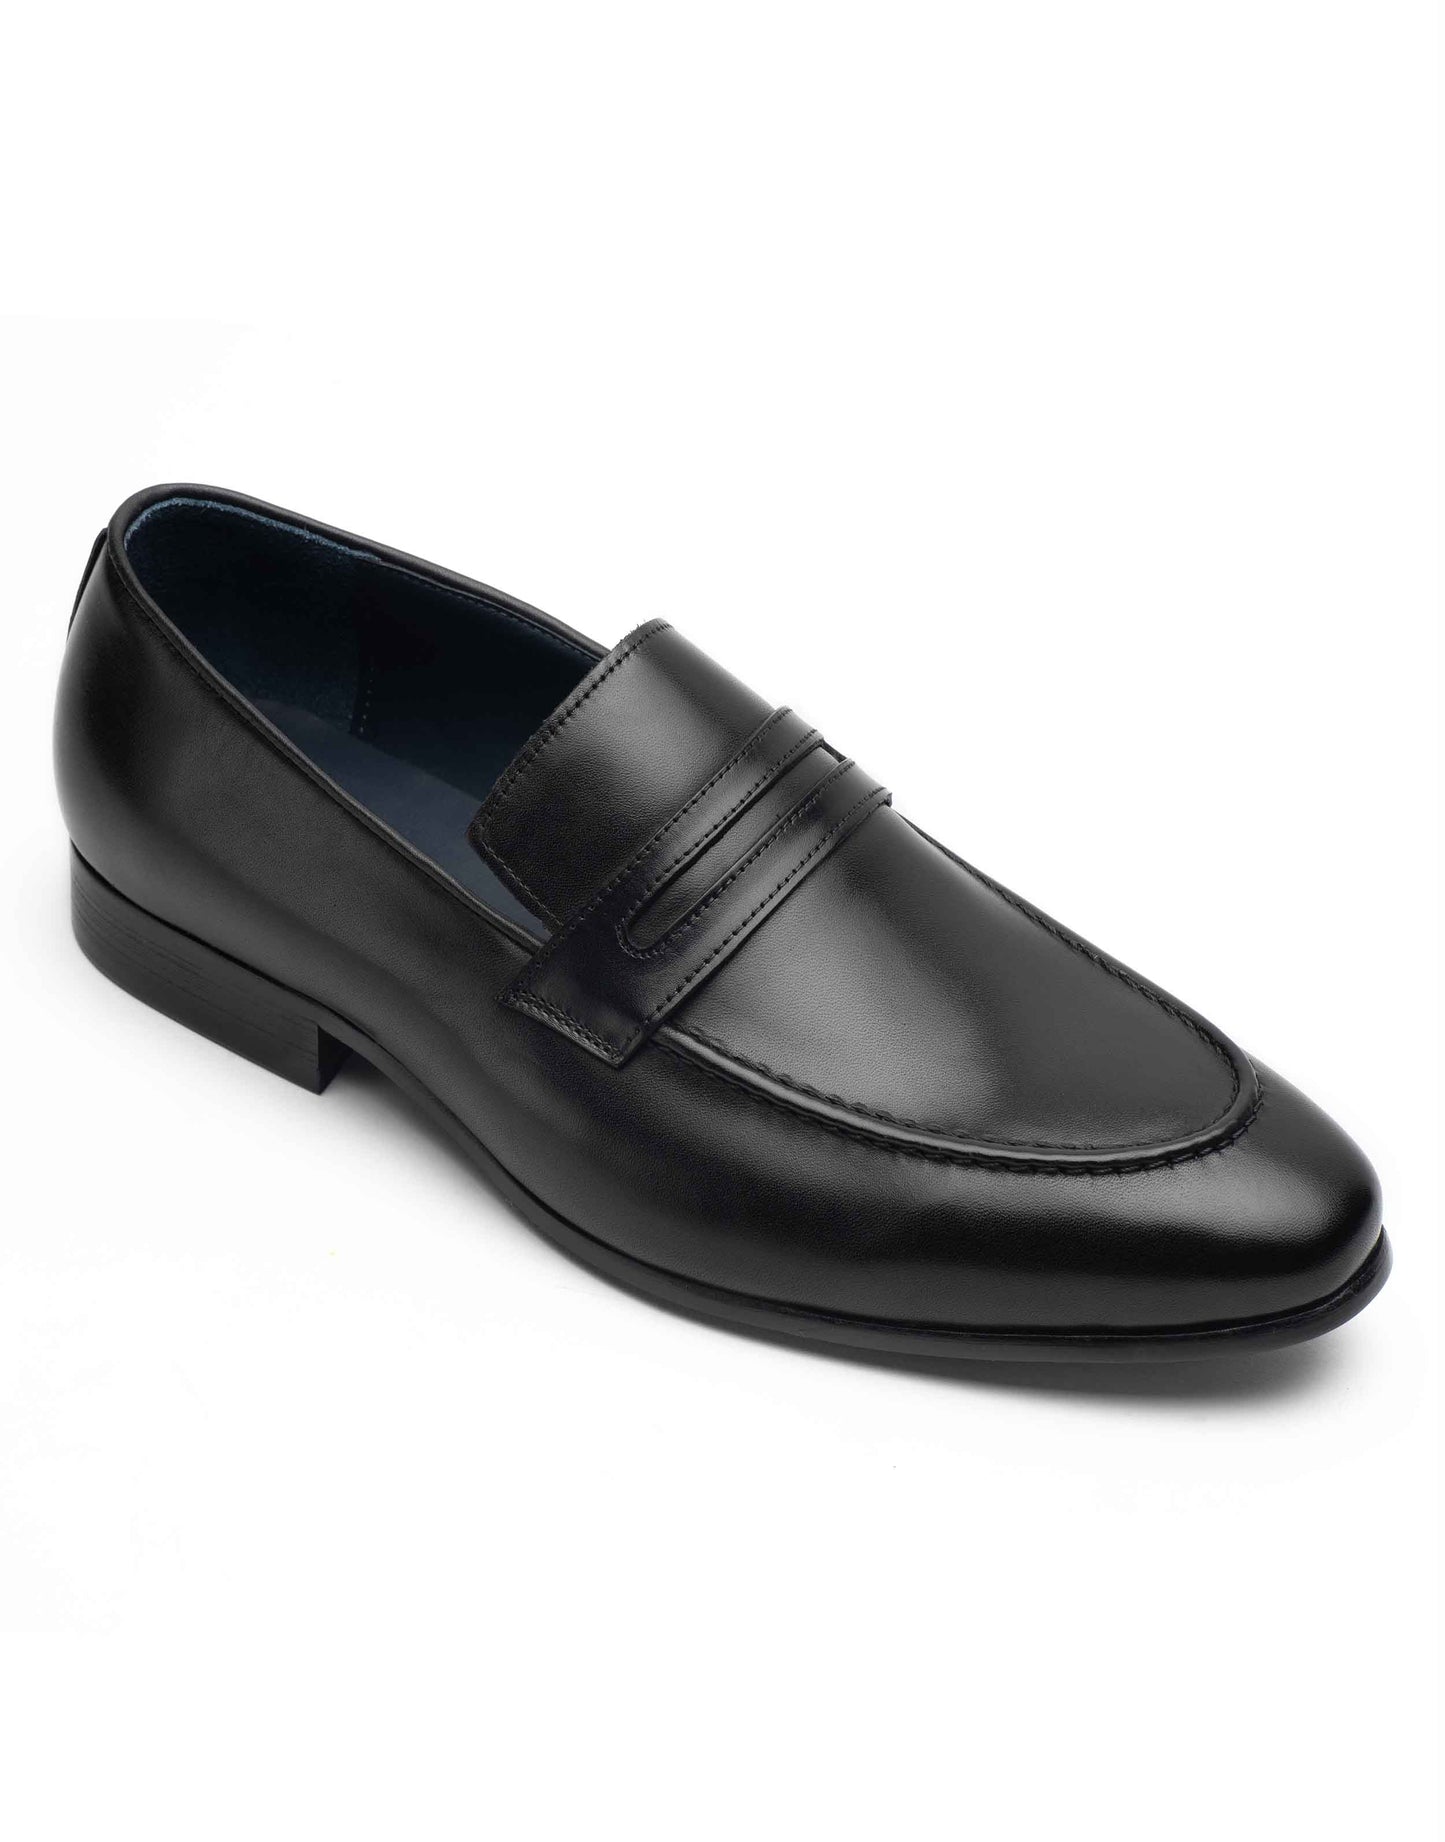 Charcoal Penny Loafer-RE3677-002